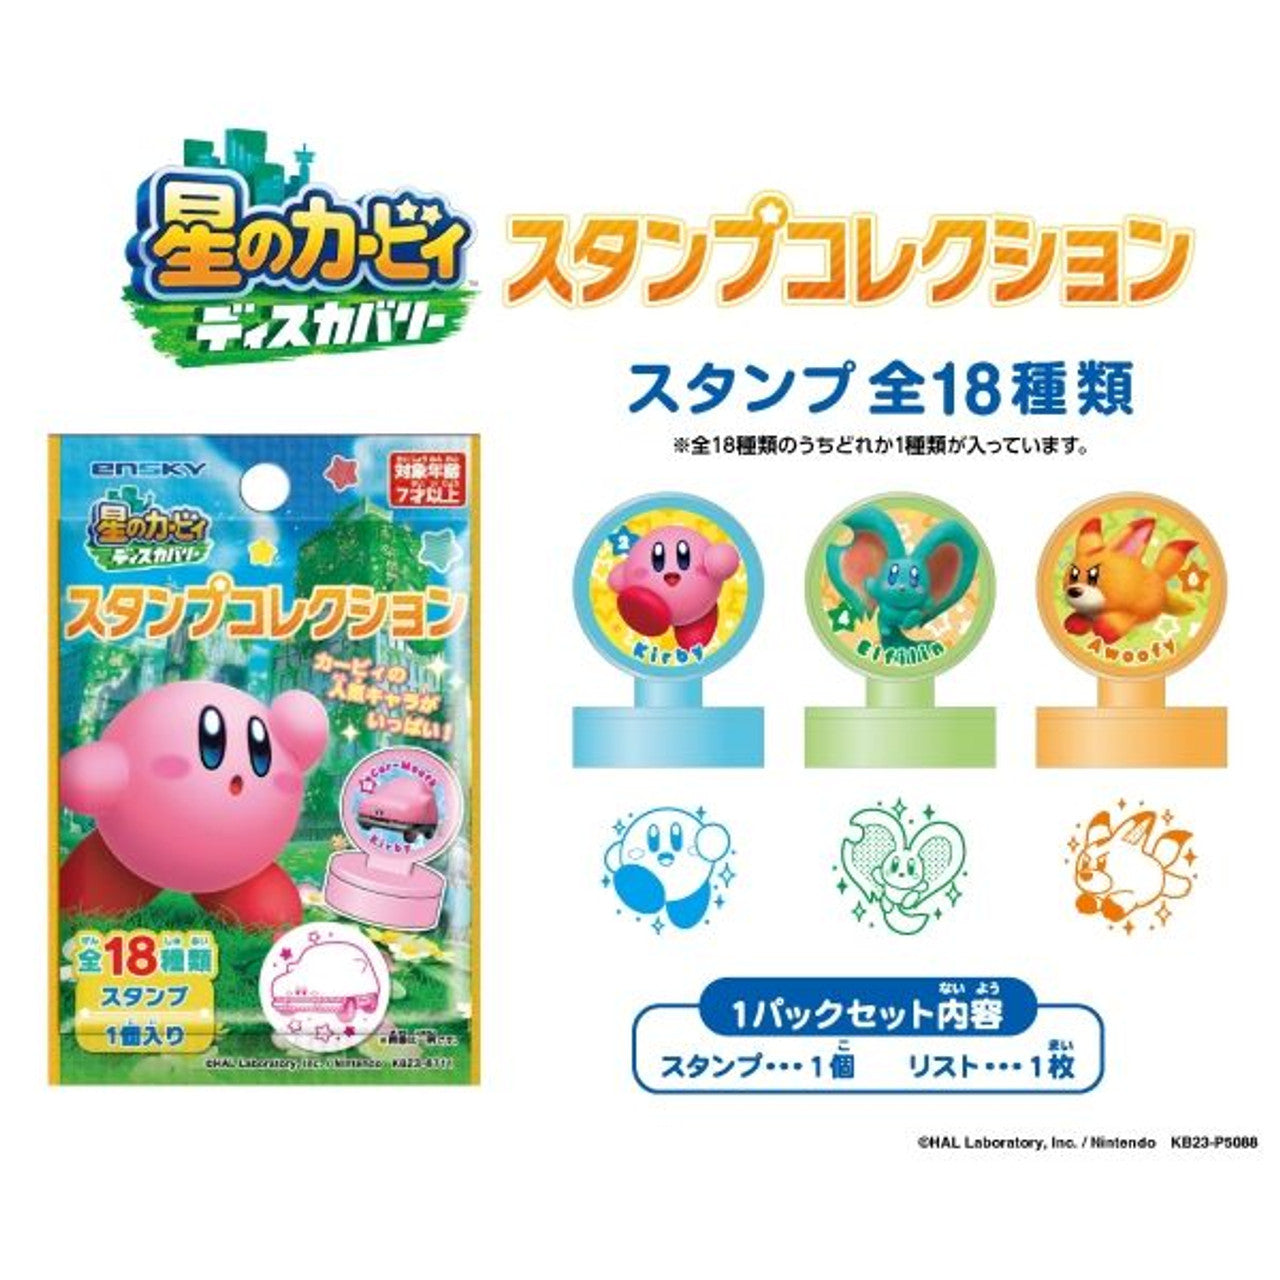 Ensky Kirby and the Forgotten Land Stamp Collection